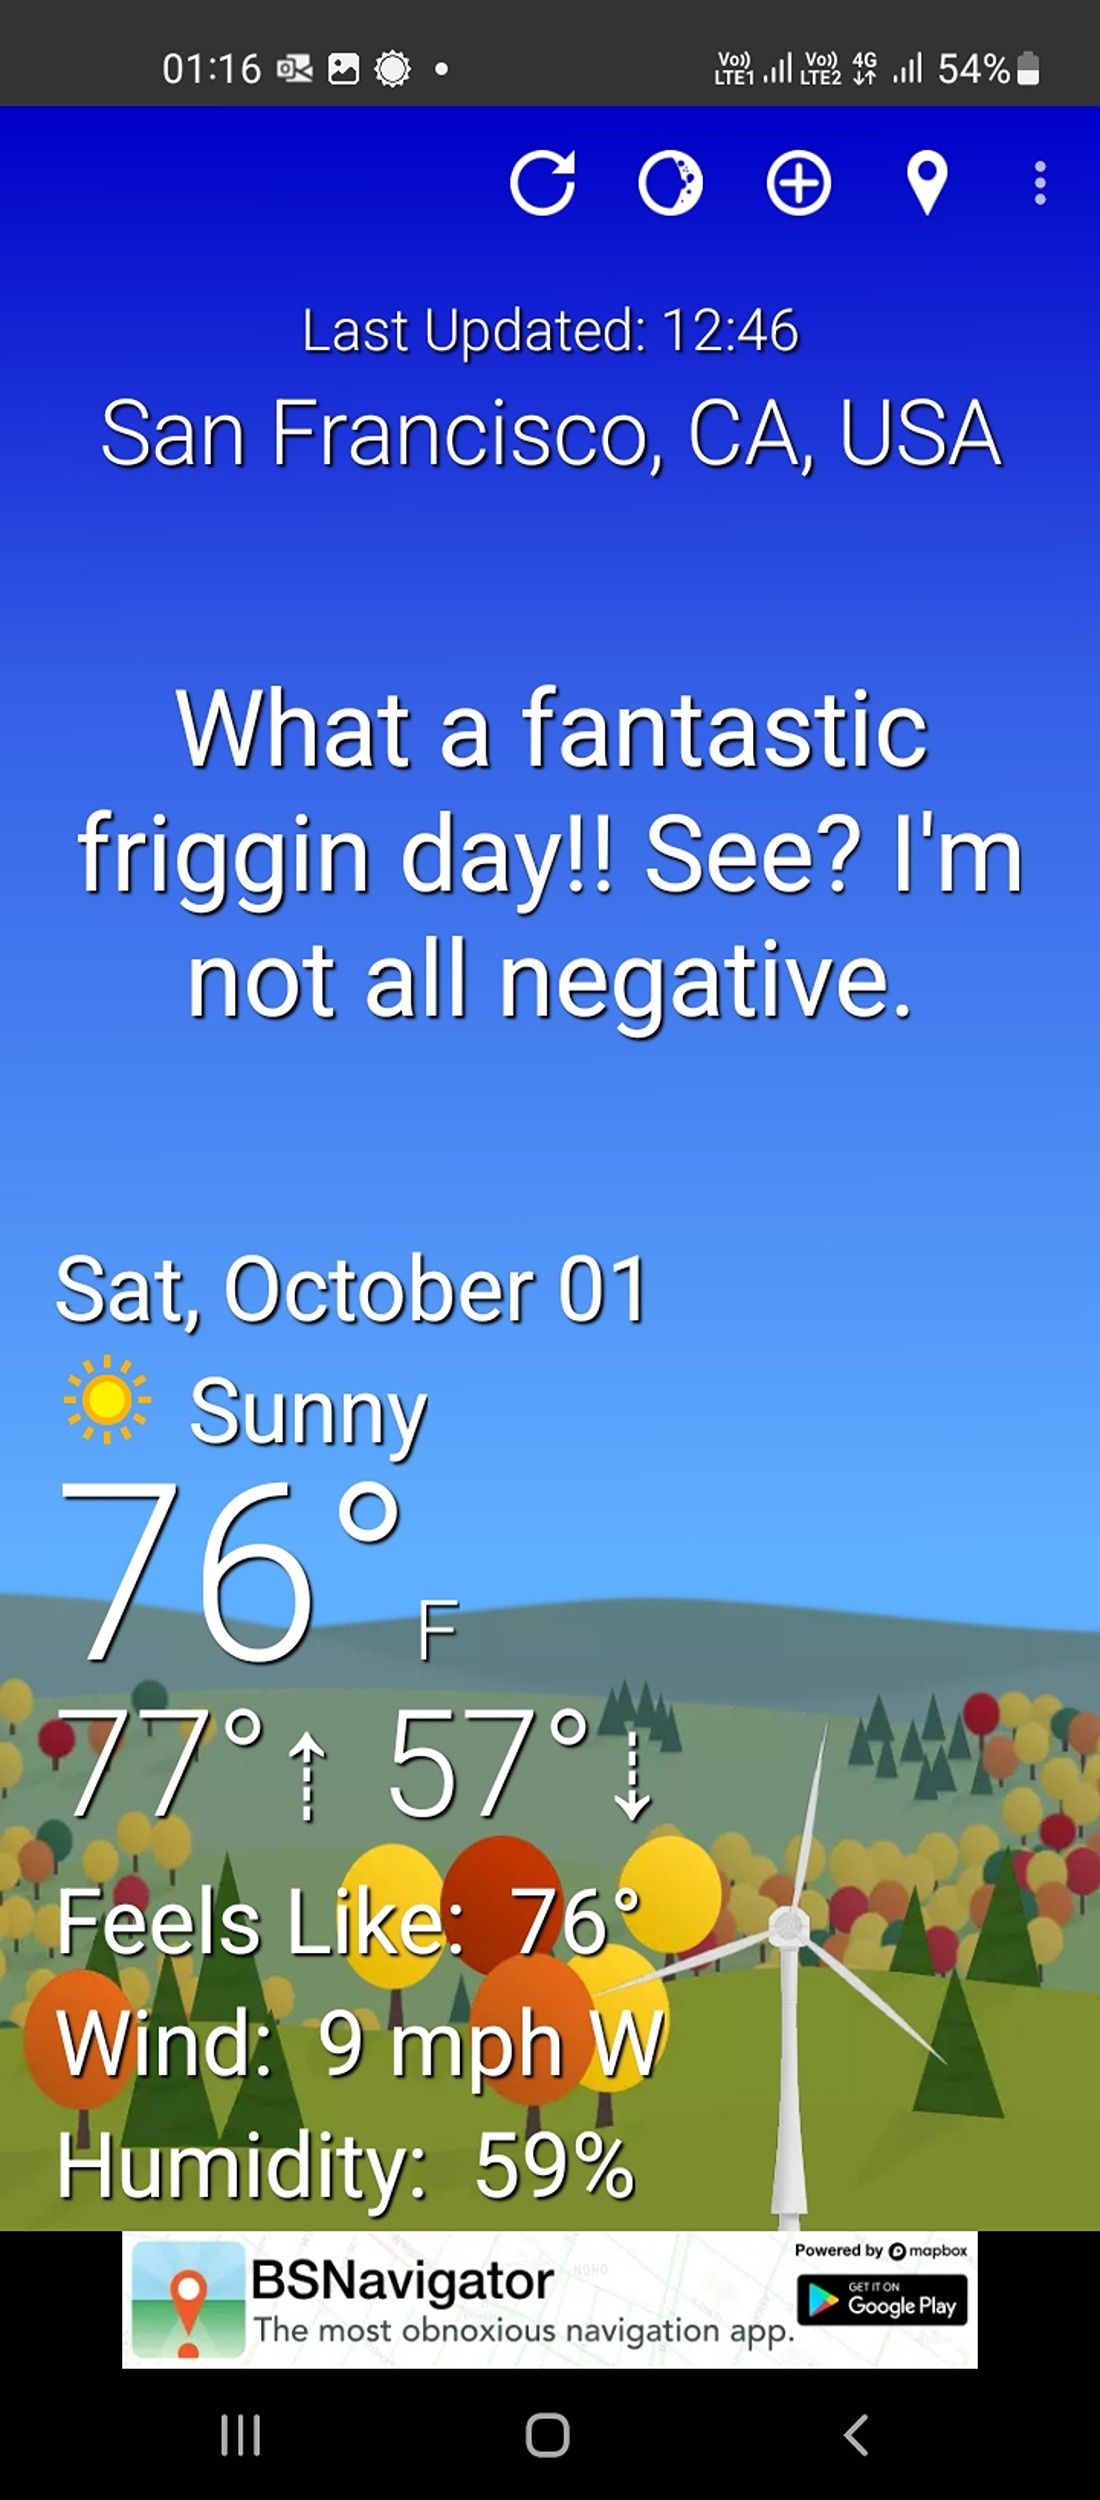 Current weather conditions in WTForecast